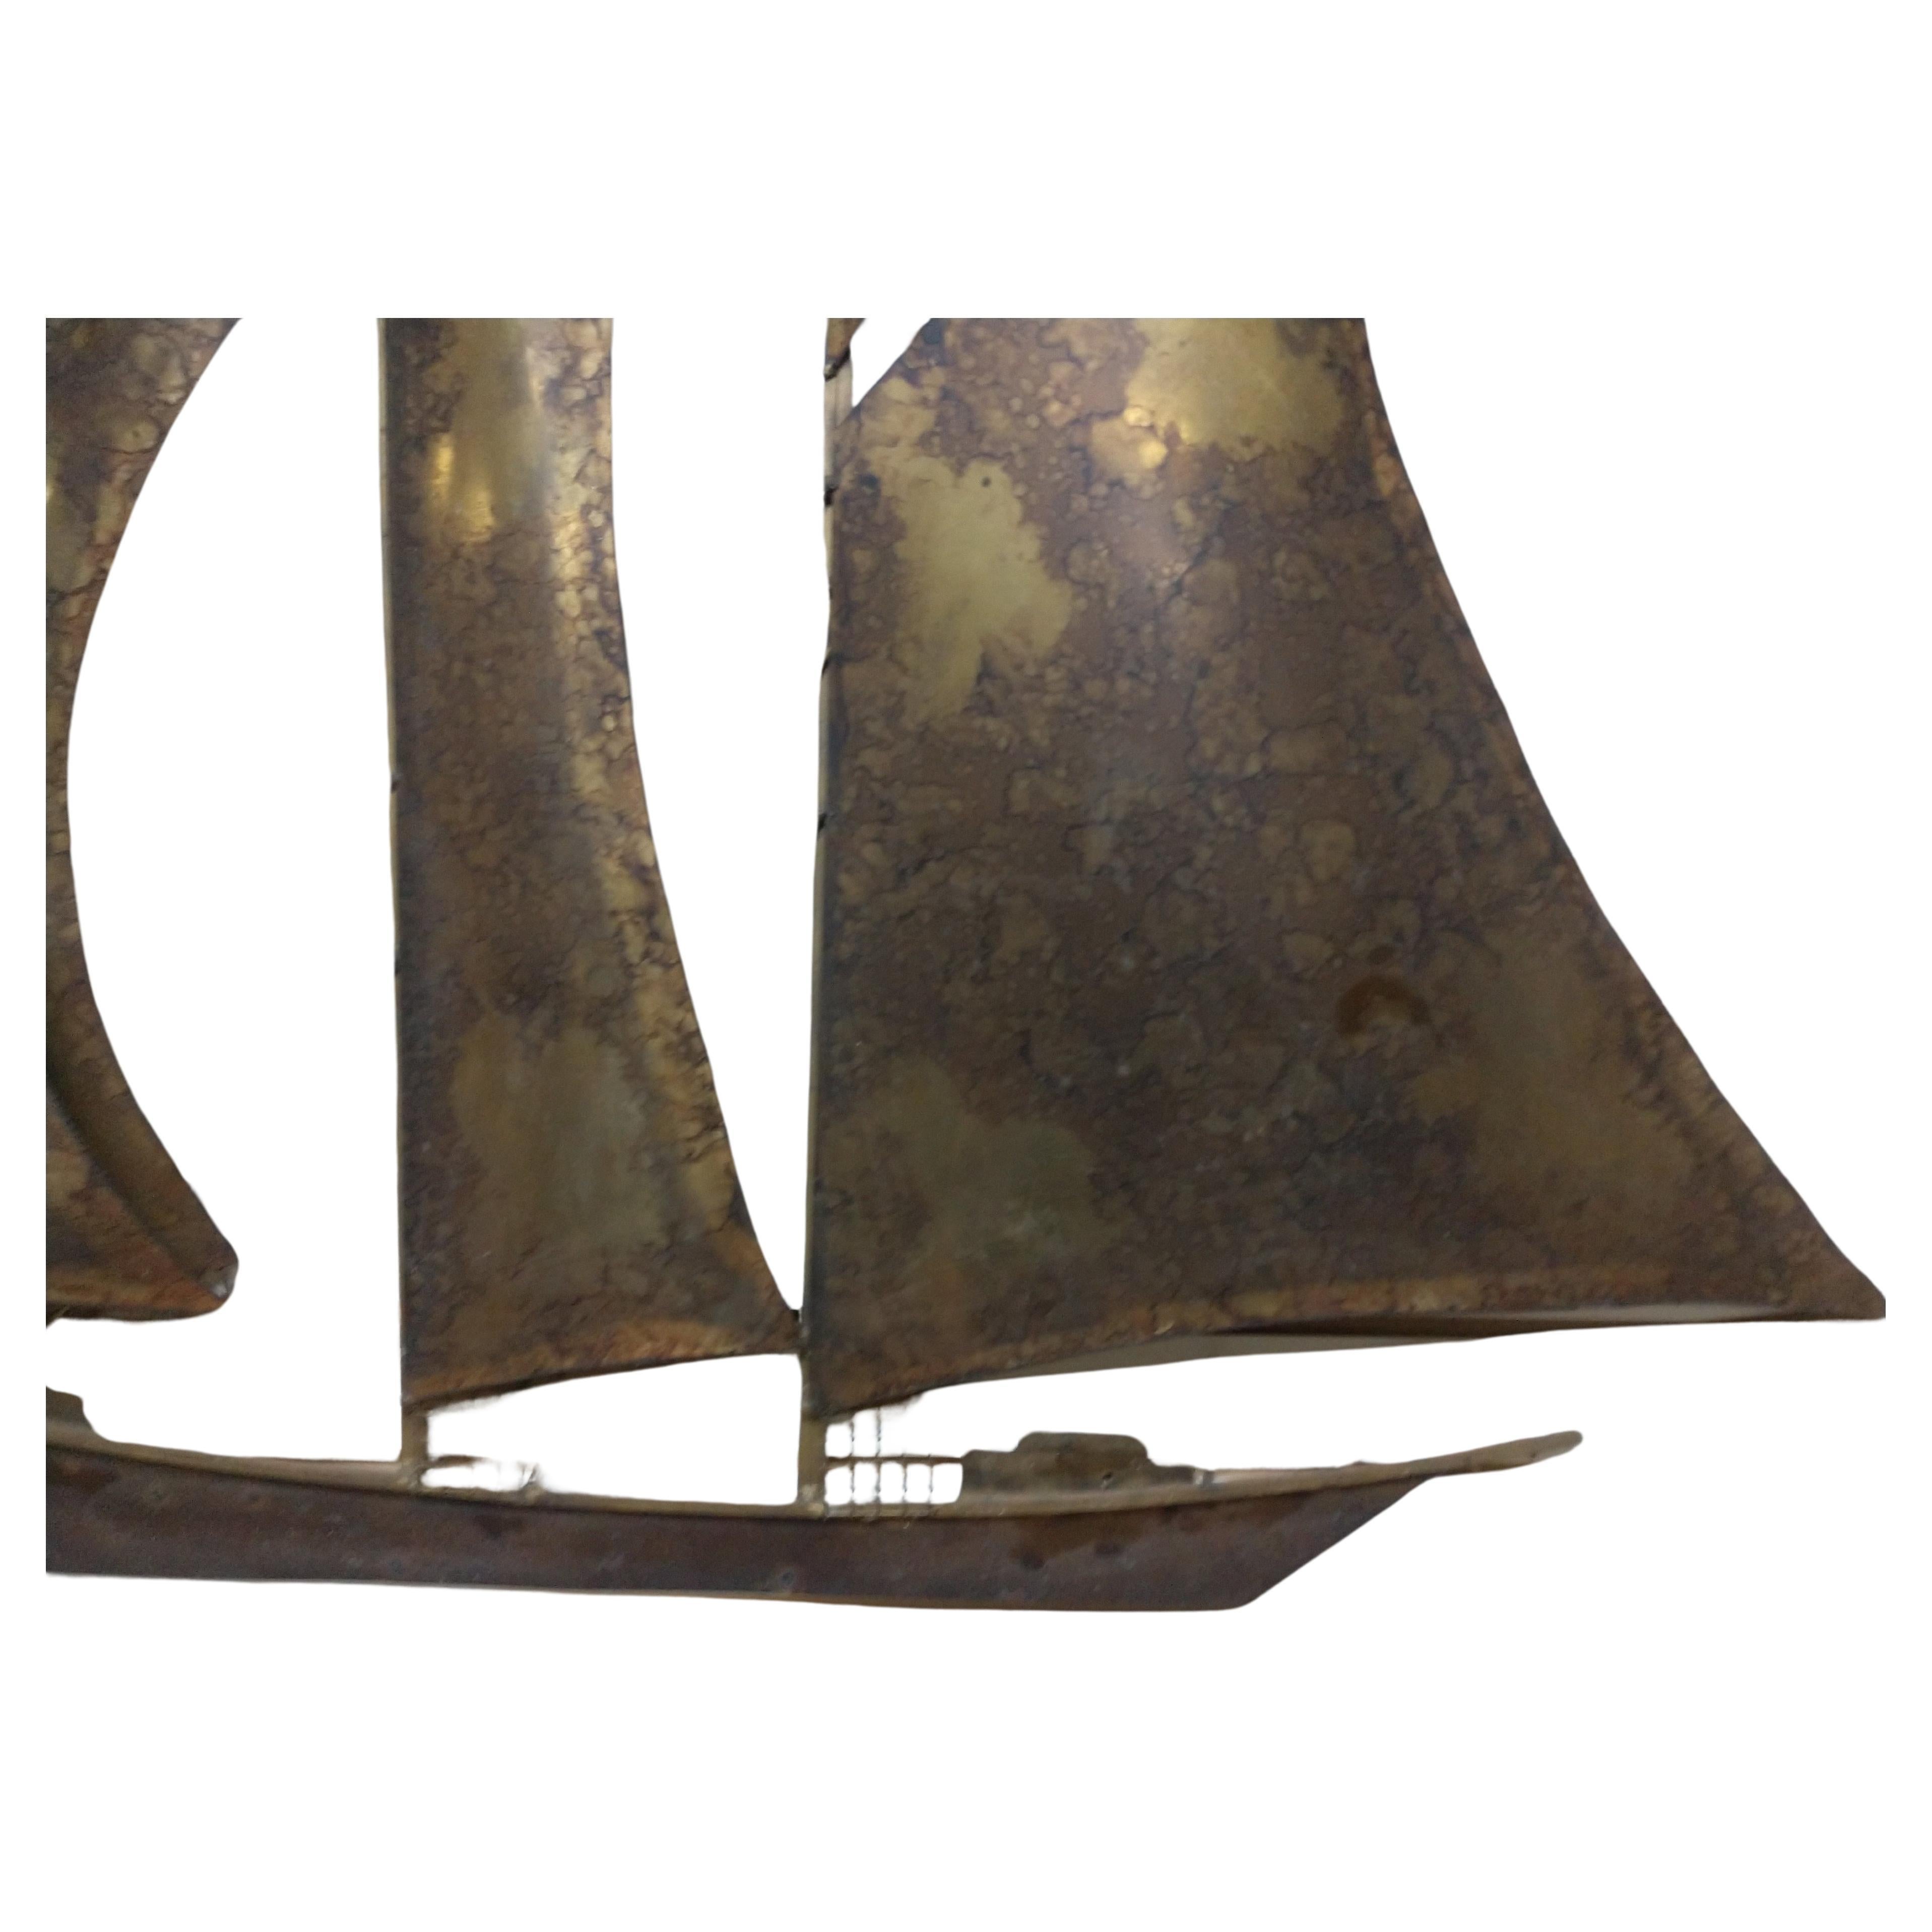 Large tall schooner ship with six masts torch cut in brass in the style of Curtis Jere. In excellent vintage condition with minimal wear. This item can be parcel posted.